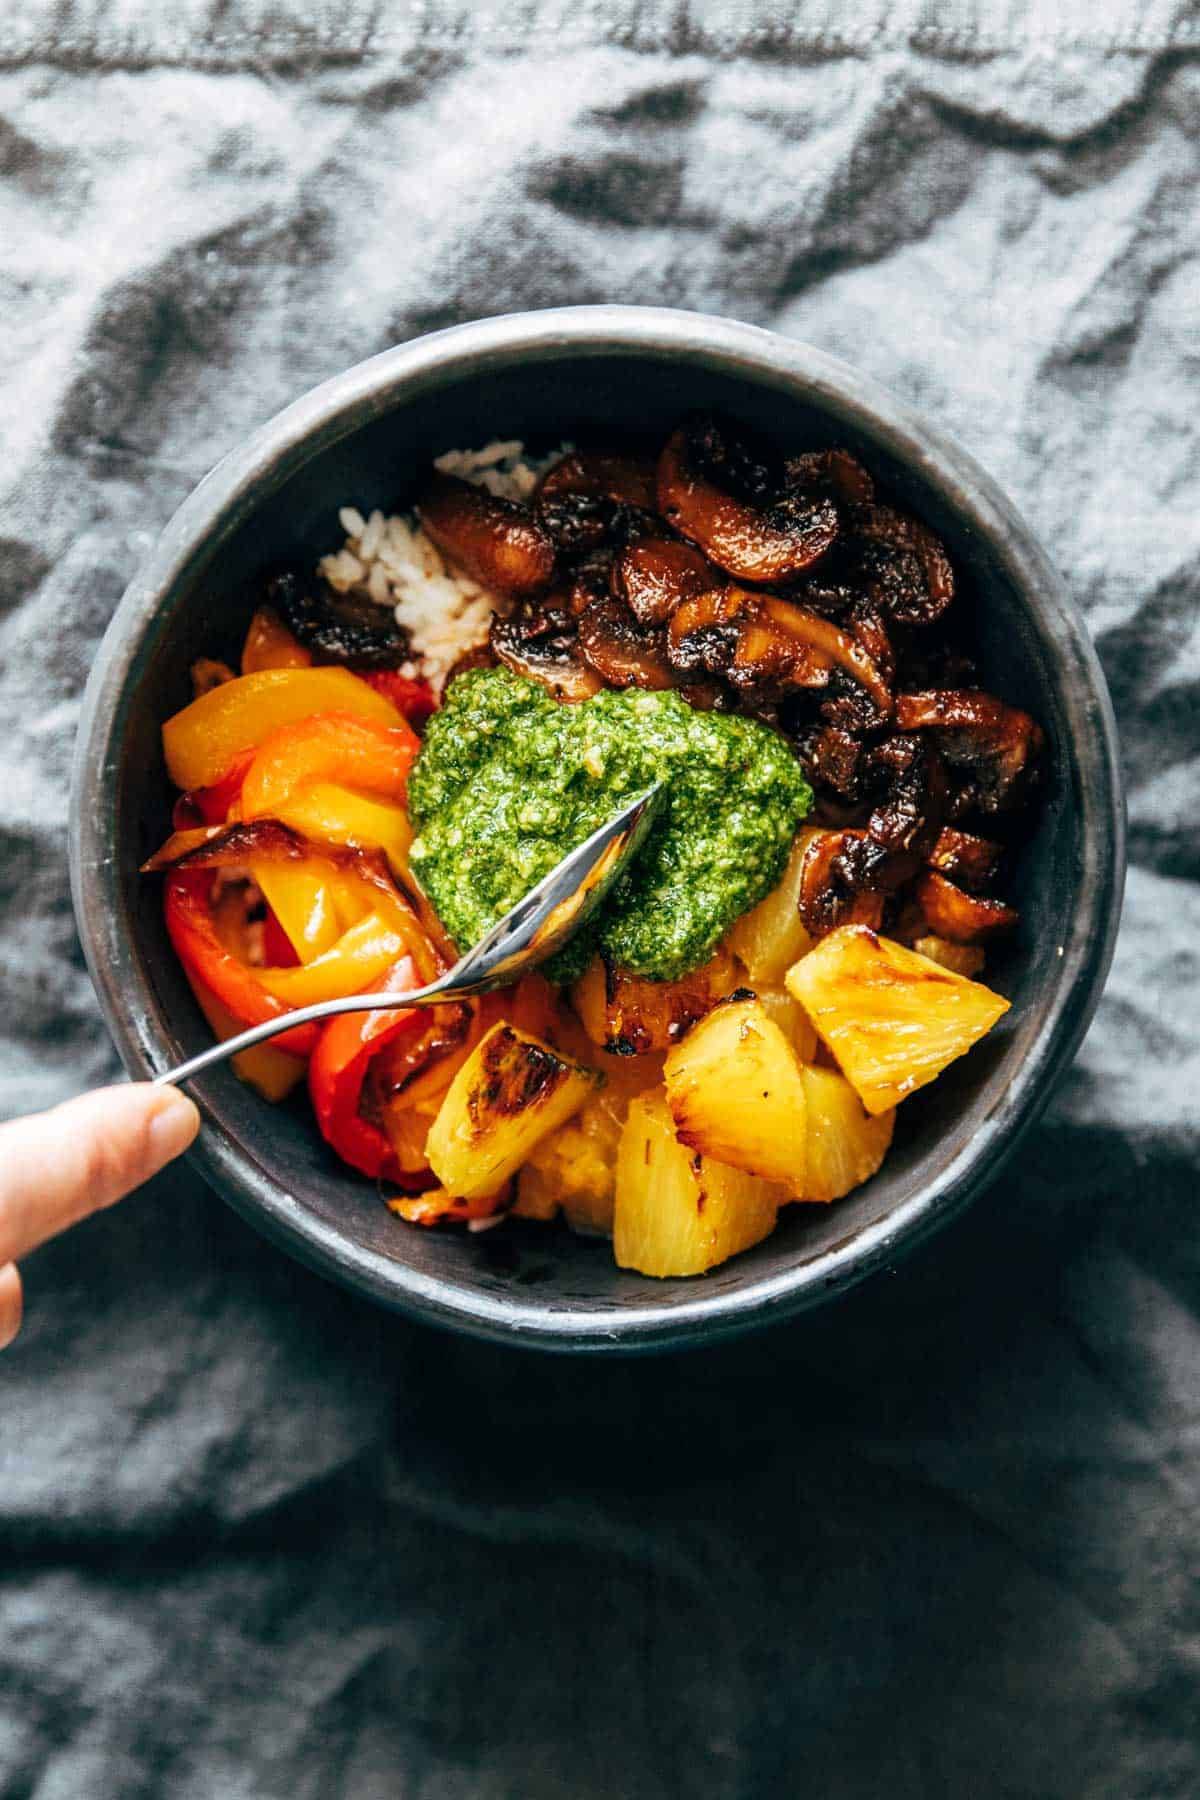 Mushroom bowls with kale pesto scooped on top.